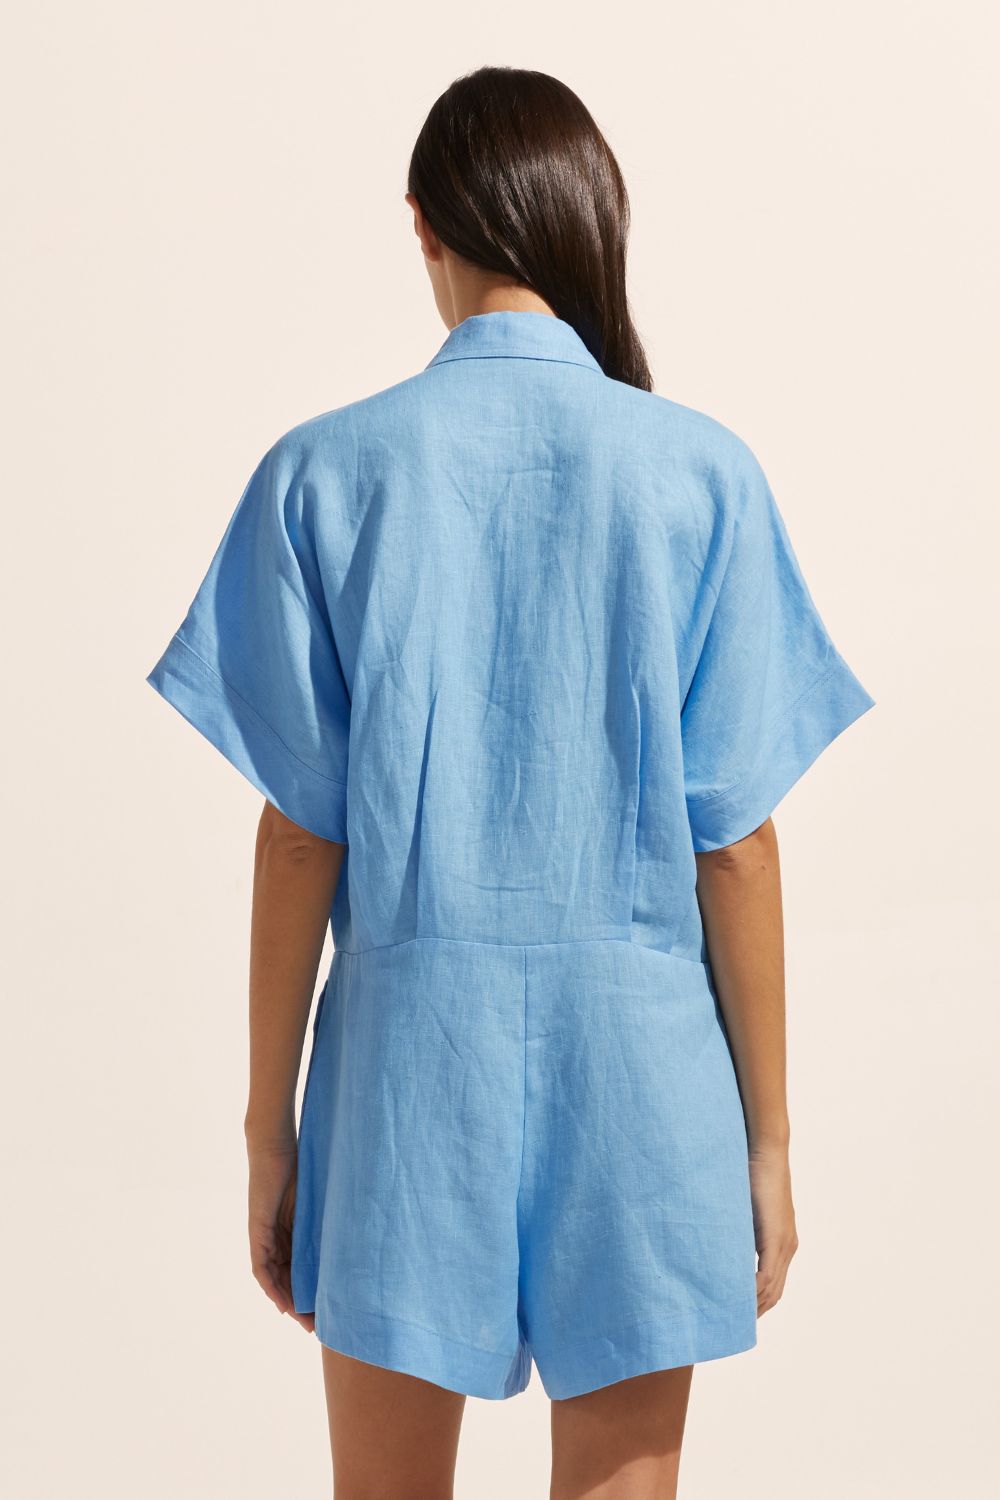 blue, jumpsuit, button down collar, oversized patch pockets, back view